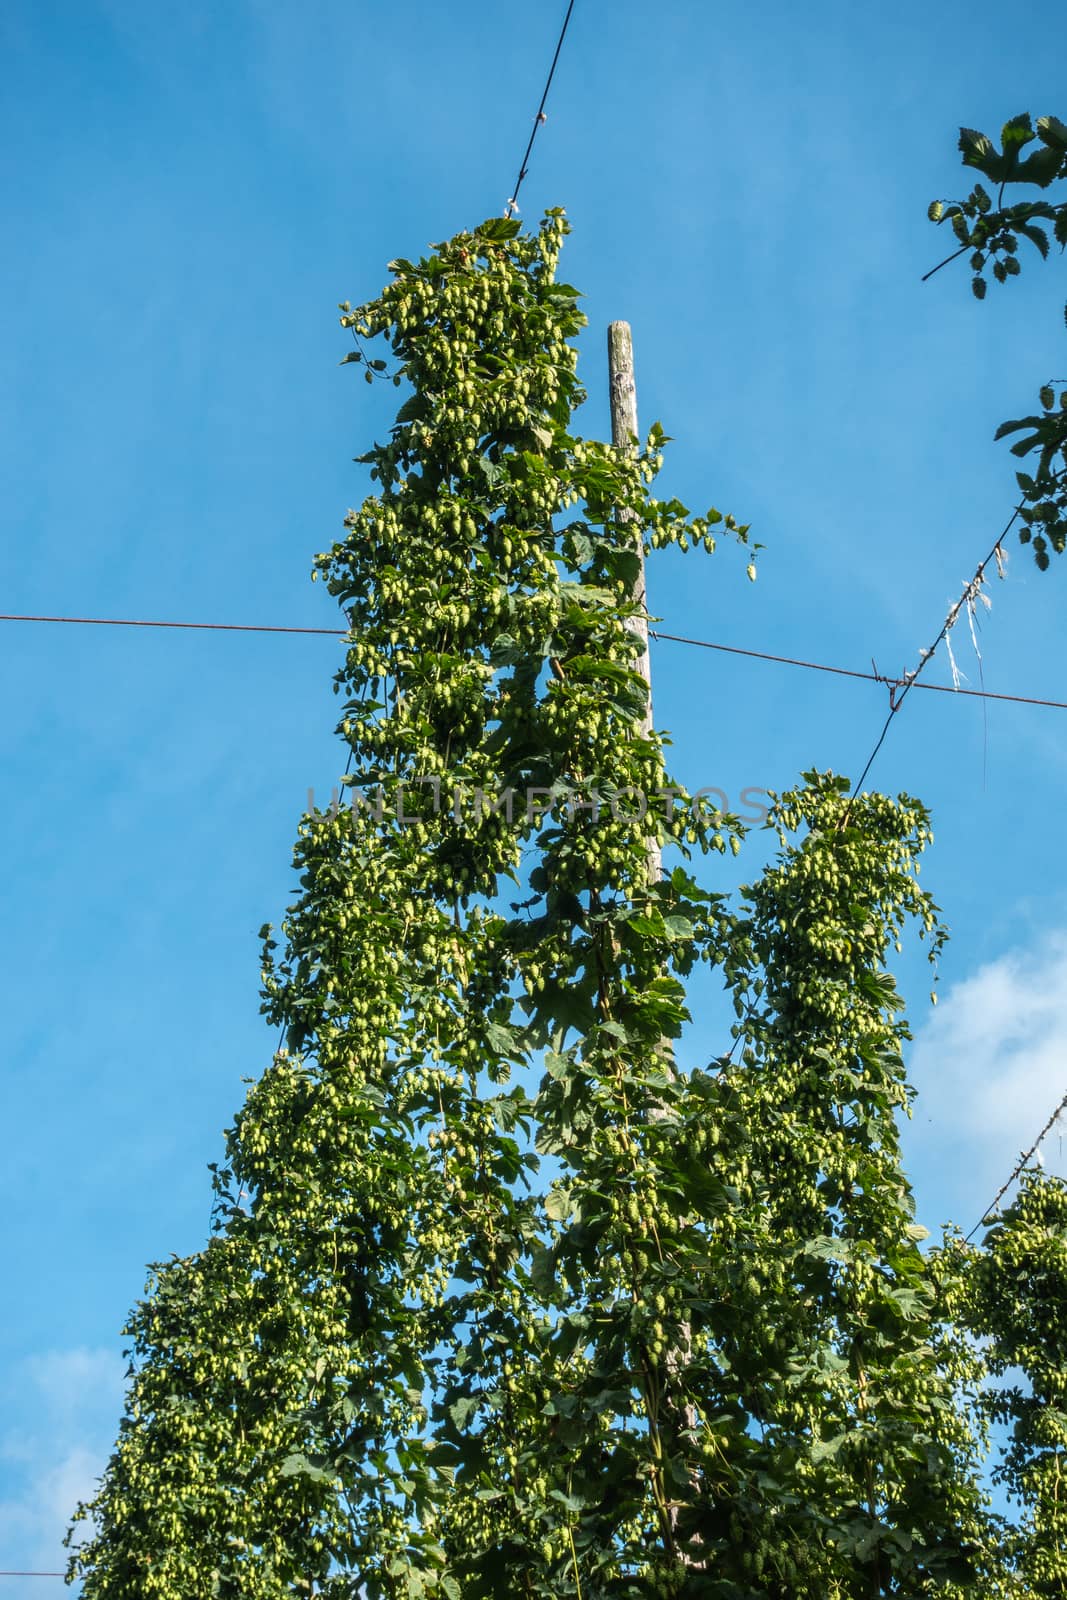 Top of hops plant with plenty of cones, Proven Belgium. by Claudine